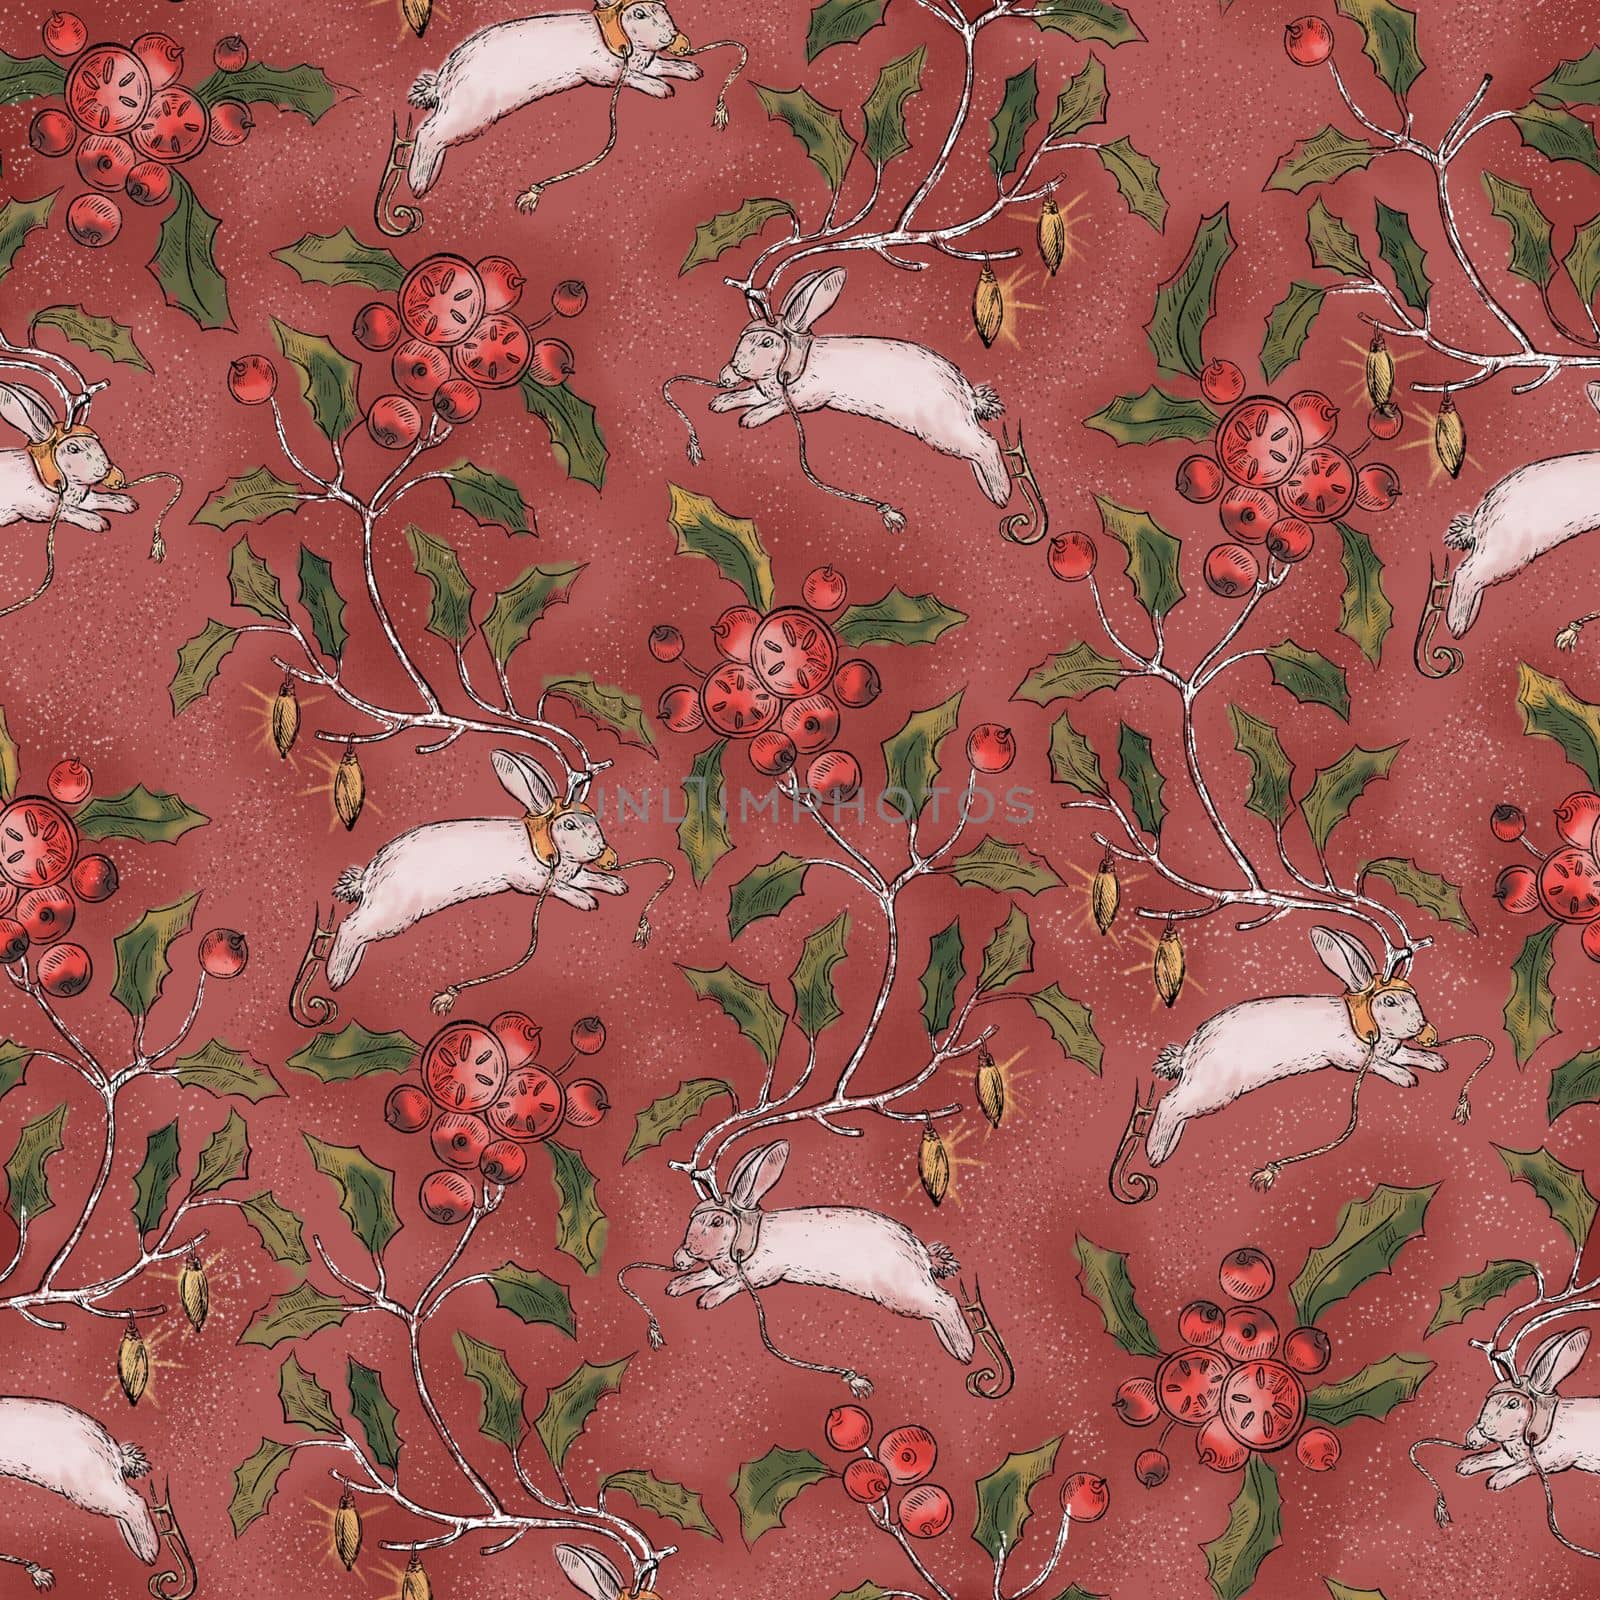 Trendy print with rabbits, hare, gifts, Christmas tree, flowers, snowflakes. Cute illustration of floral rabbits.